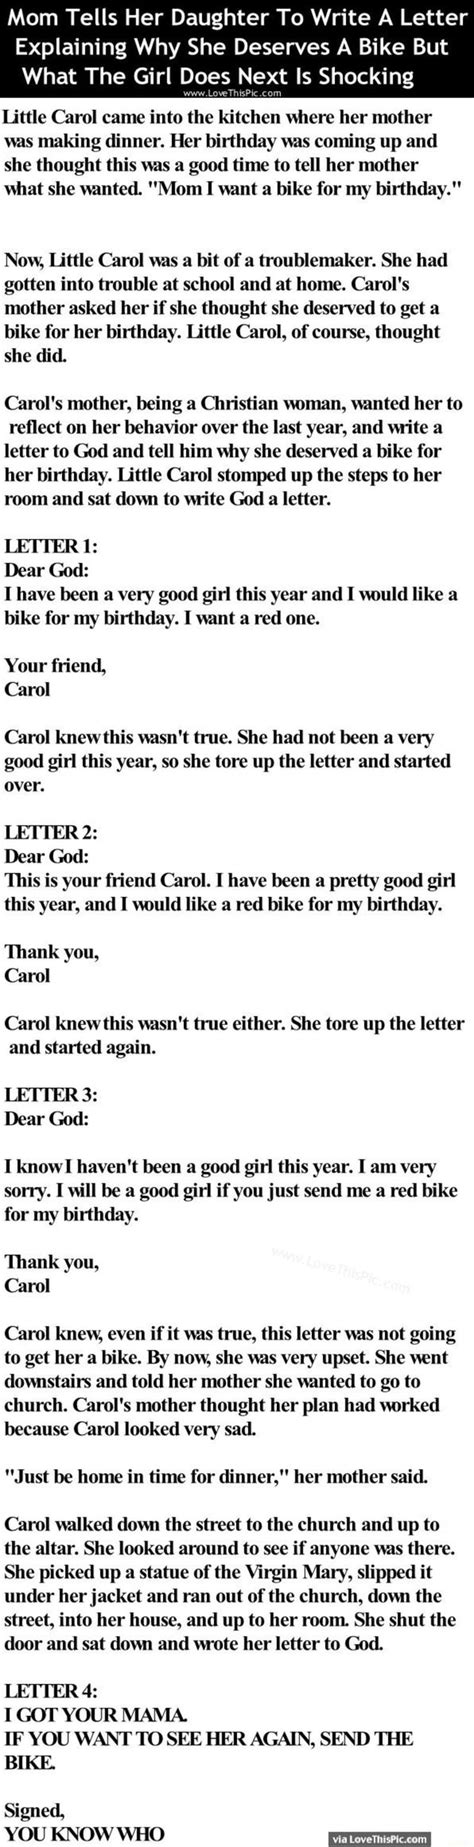 mom tells her daughter to write a letter explaining why she deserves a